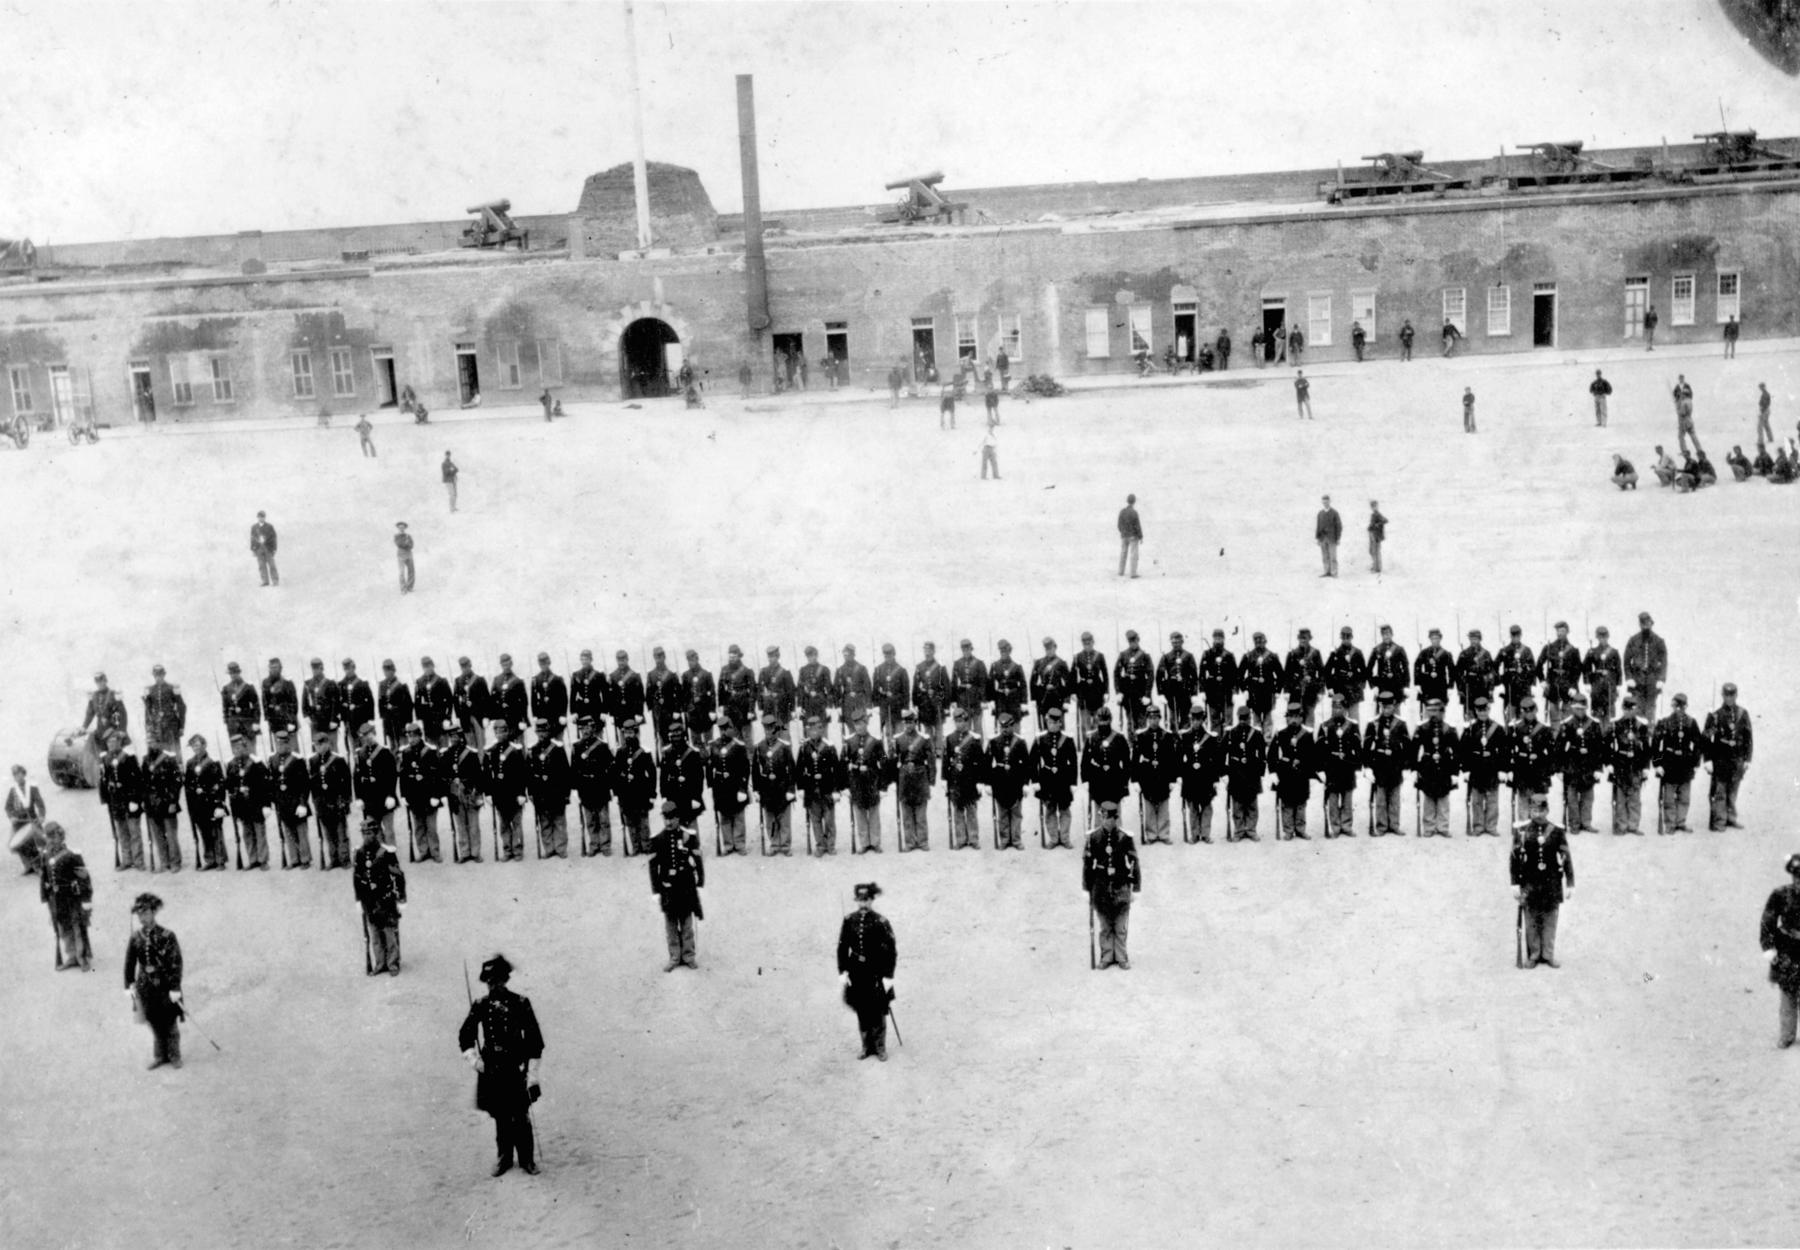 Company H of the 48th New York Regiment of the Union Army pose for a picture at Fort Pulaski, in Savannah, GA, US in 1863. If you zoom in, you can see the men in the background are actually playing baseball, and this picture is arguably the earliest known picture of a baseball game being played.